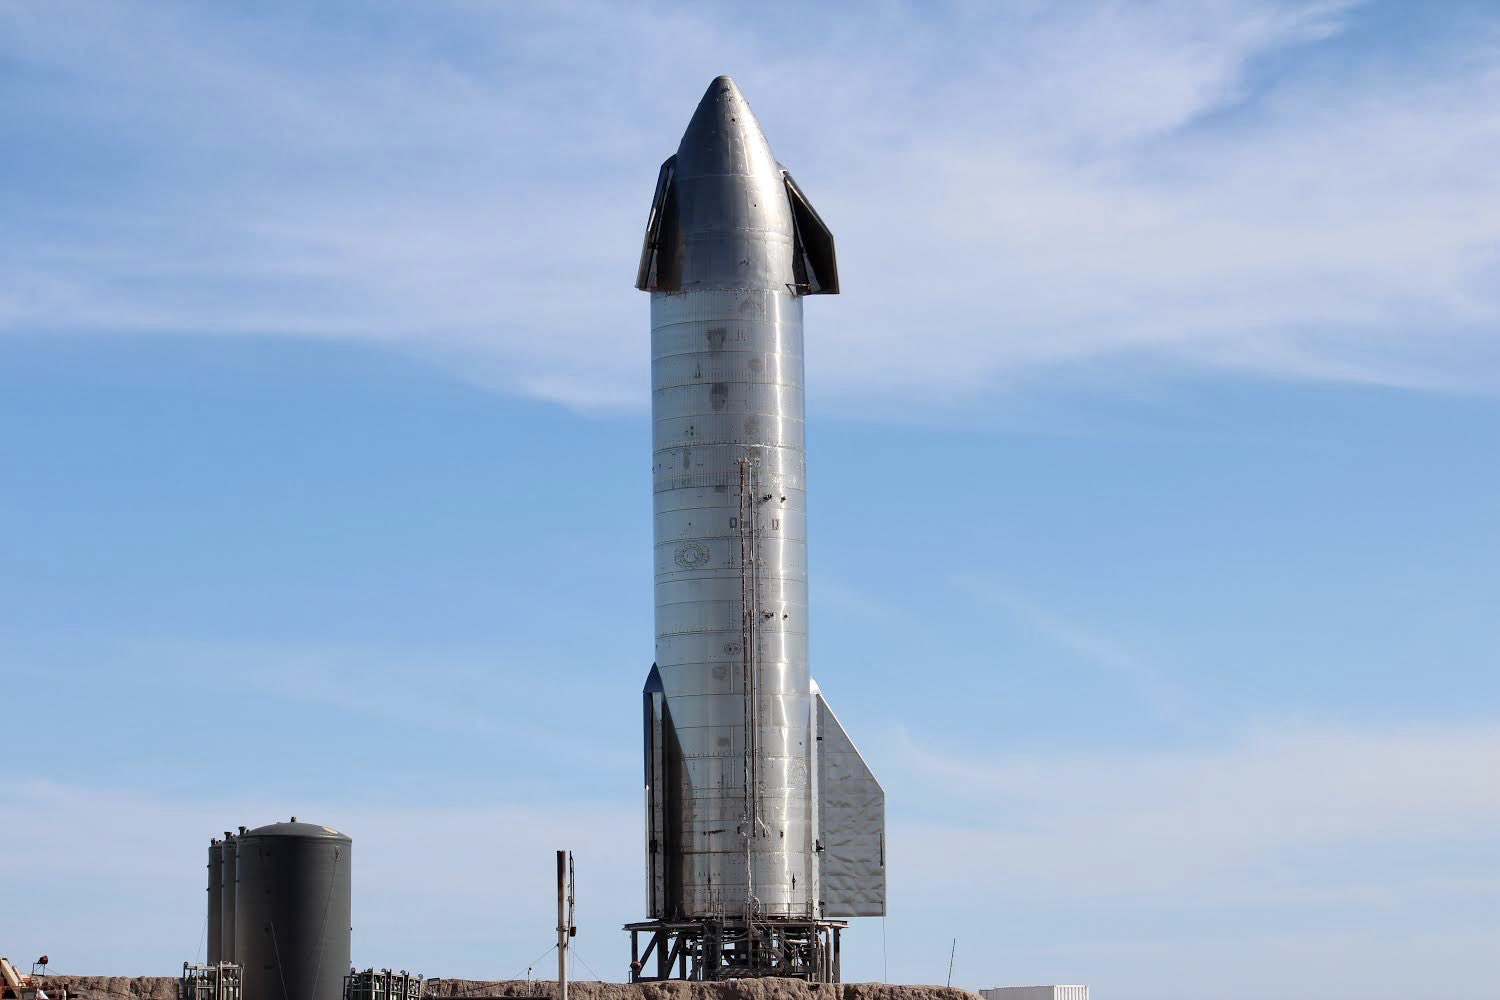 SpaceX continues preflight testing to potentially launch Starship SN9 next week